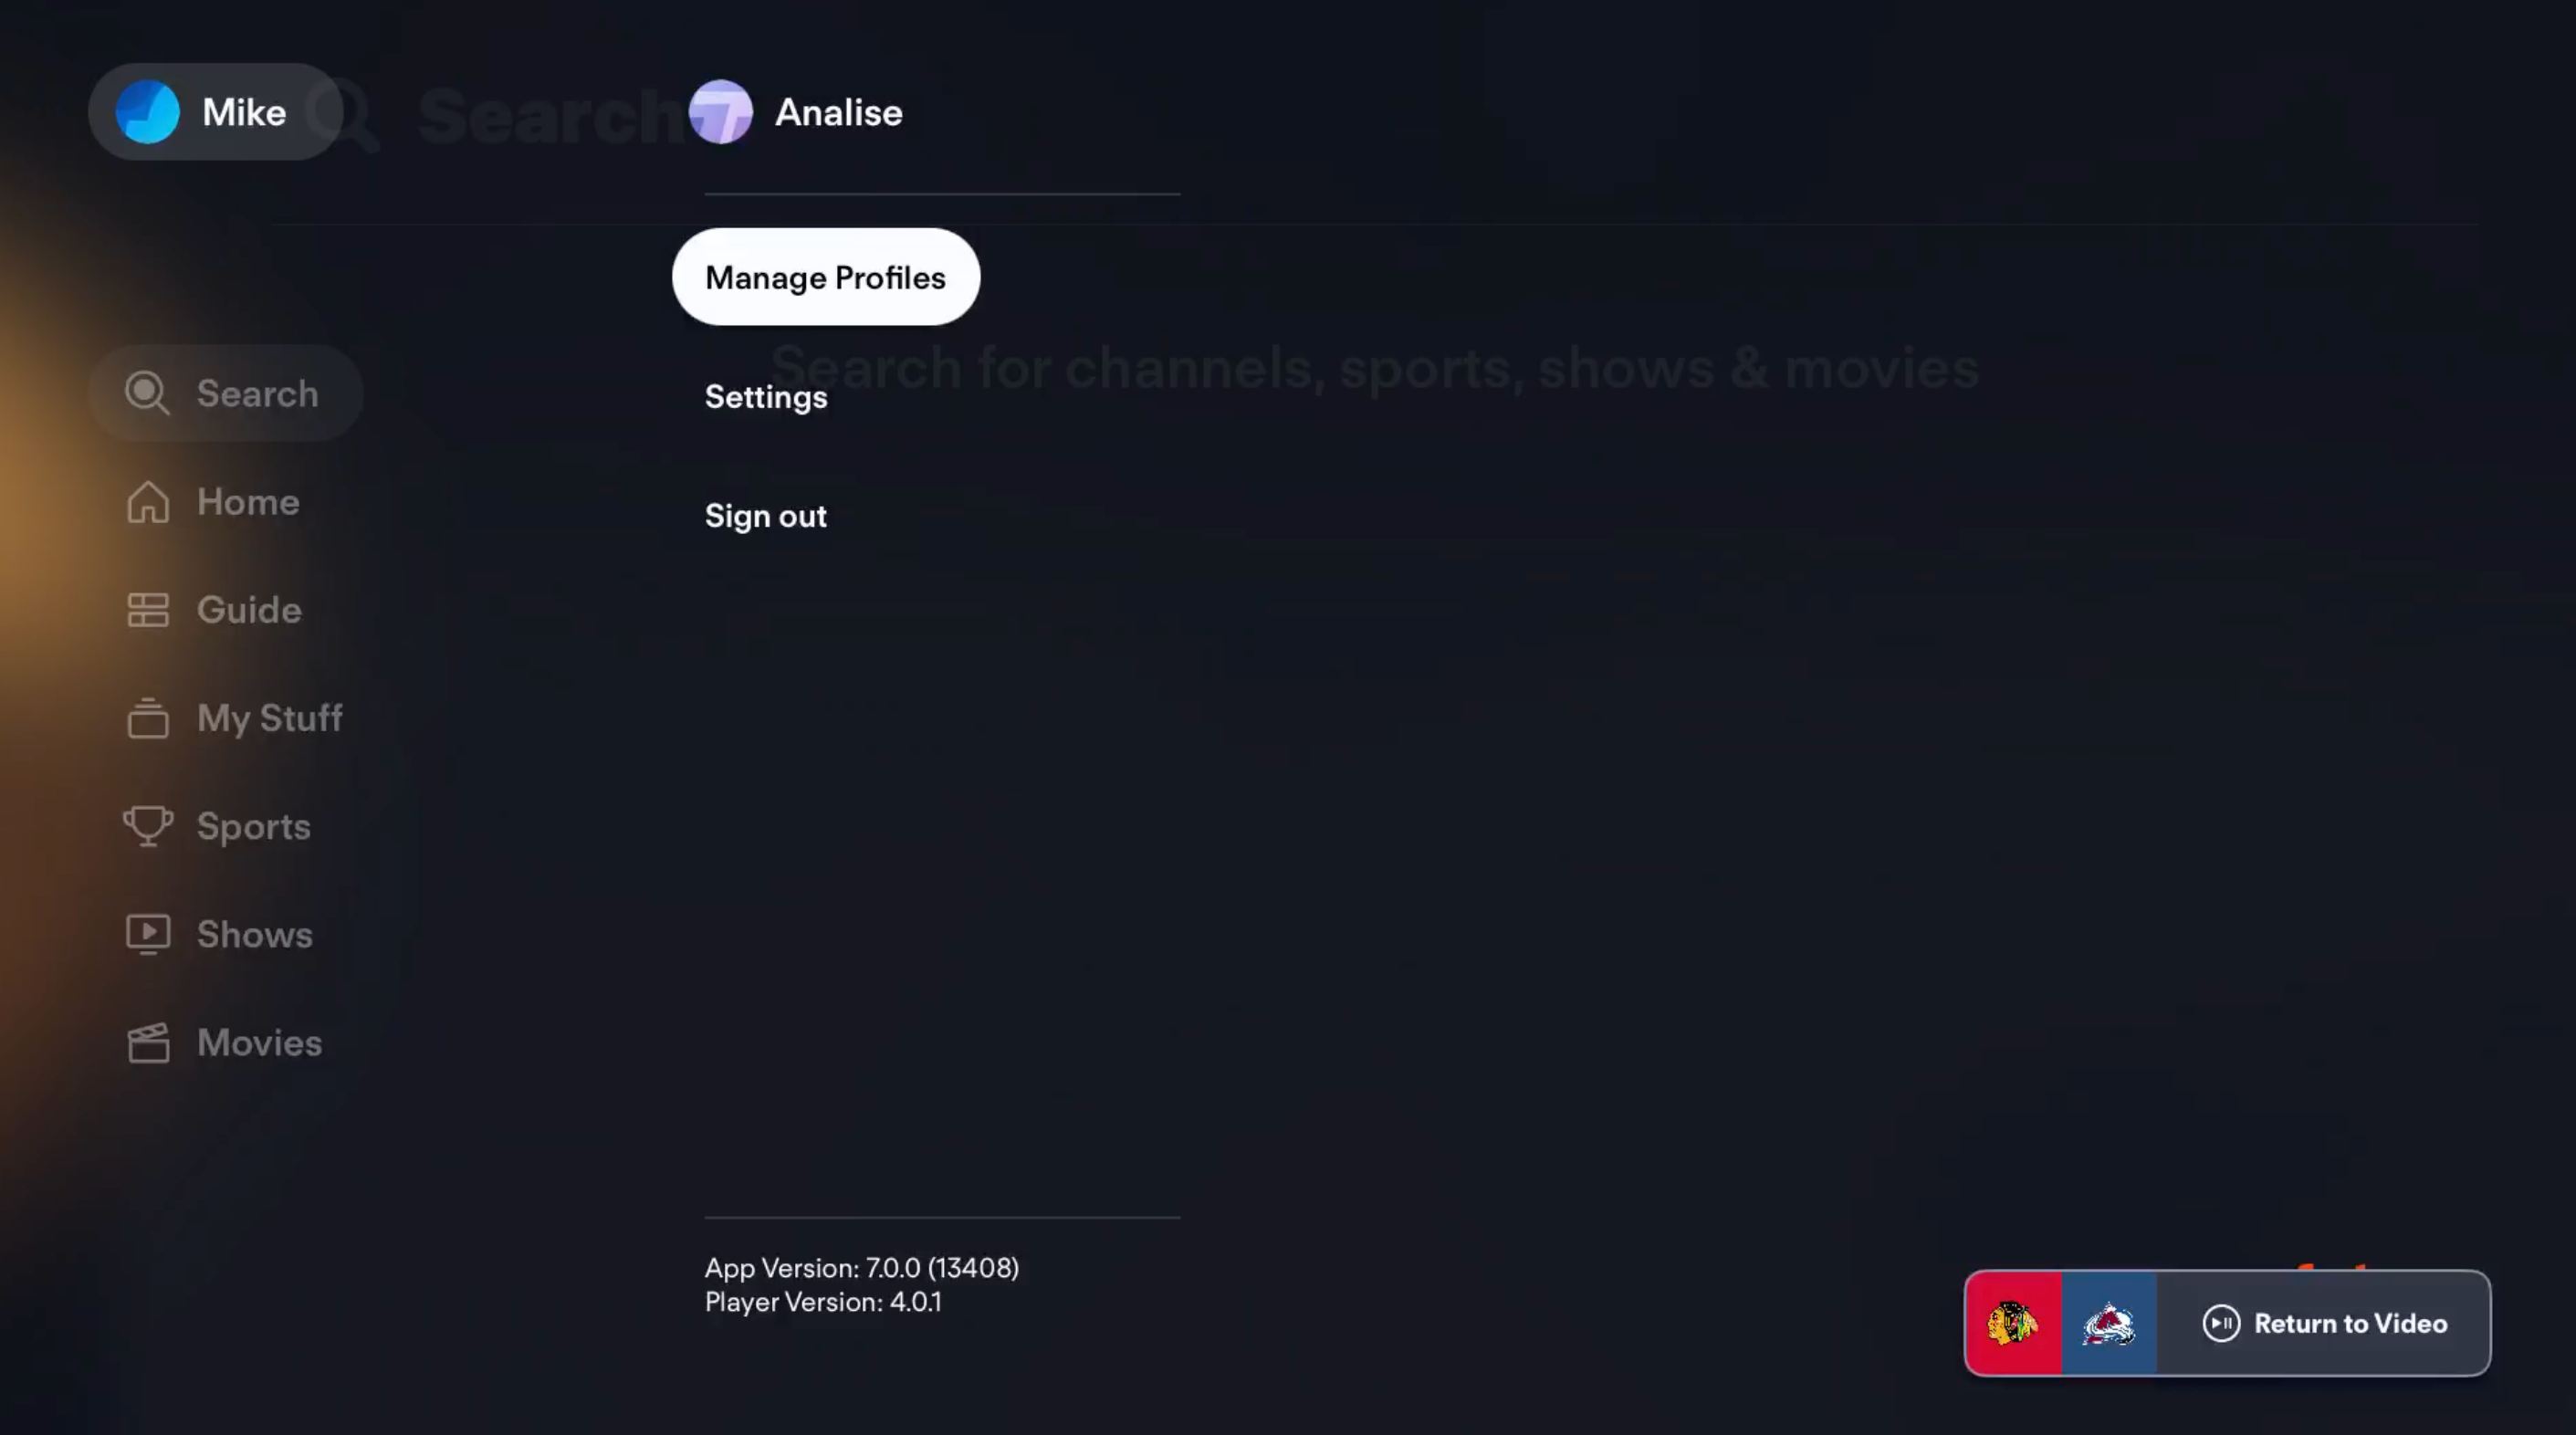 ACCOUNT page of the FuboTV app on Apple TV, accessible by selecting the PROFILE icon from the top menu